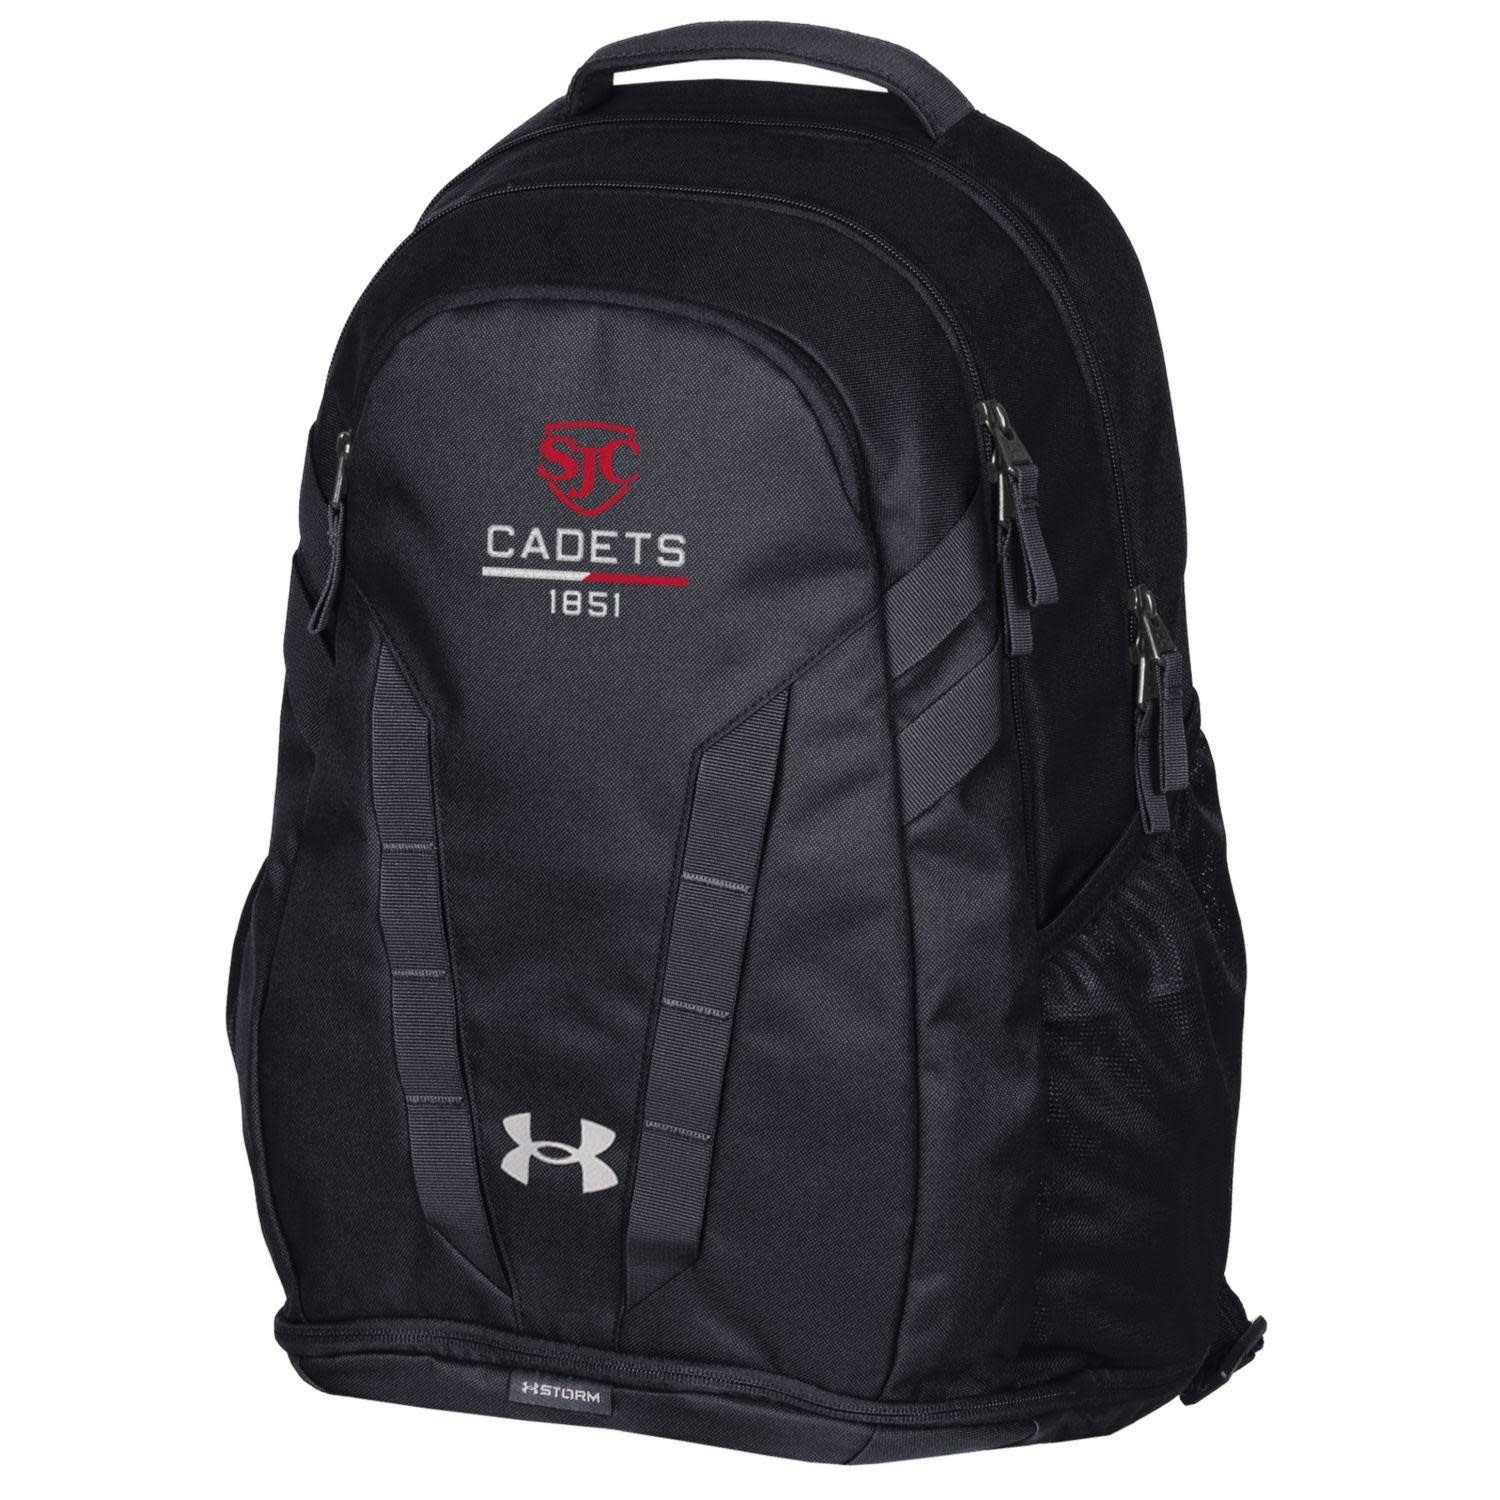 Under Armour UA3868 UNDENIABLE BACKPACK